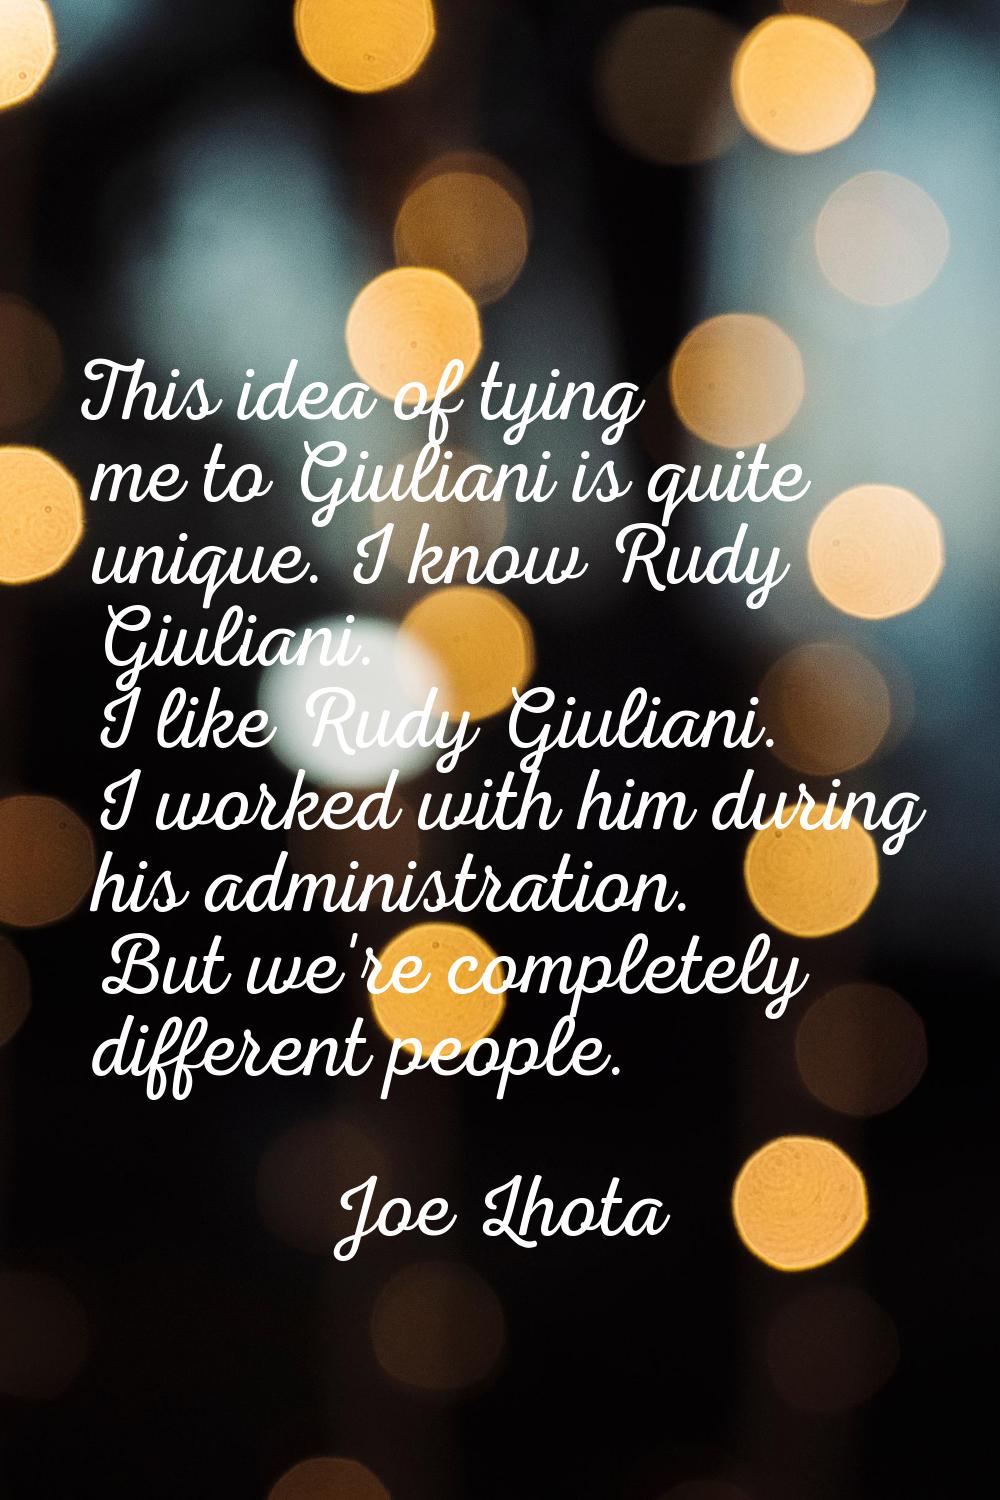 This idea of tying me to Giuliani is quite unique. I know Rudy Giuliani. I like Rudy Giuliani. I wo